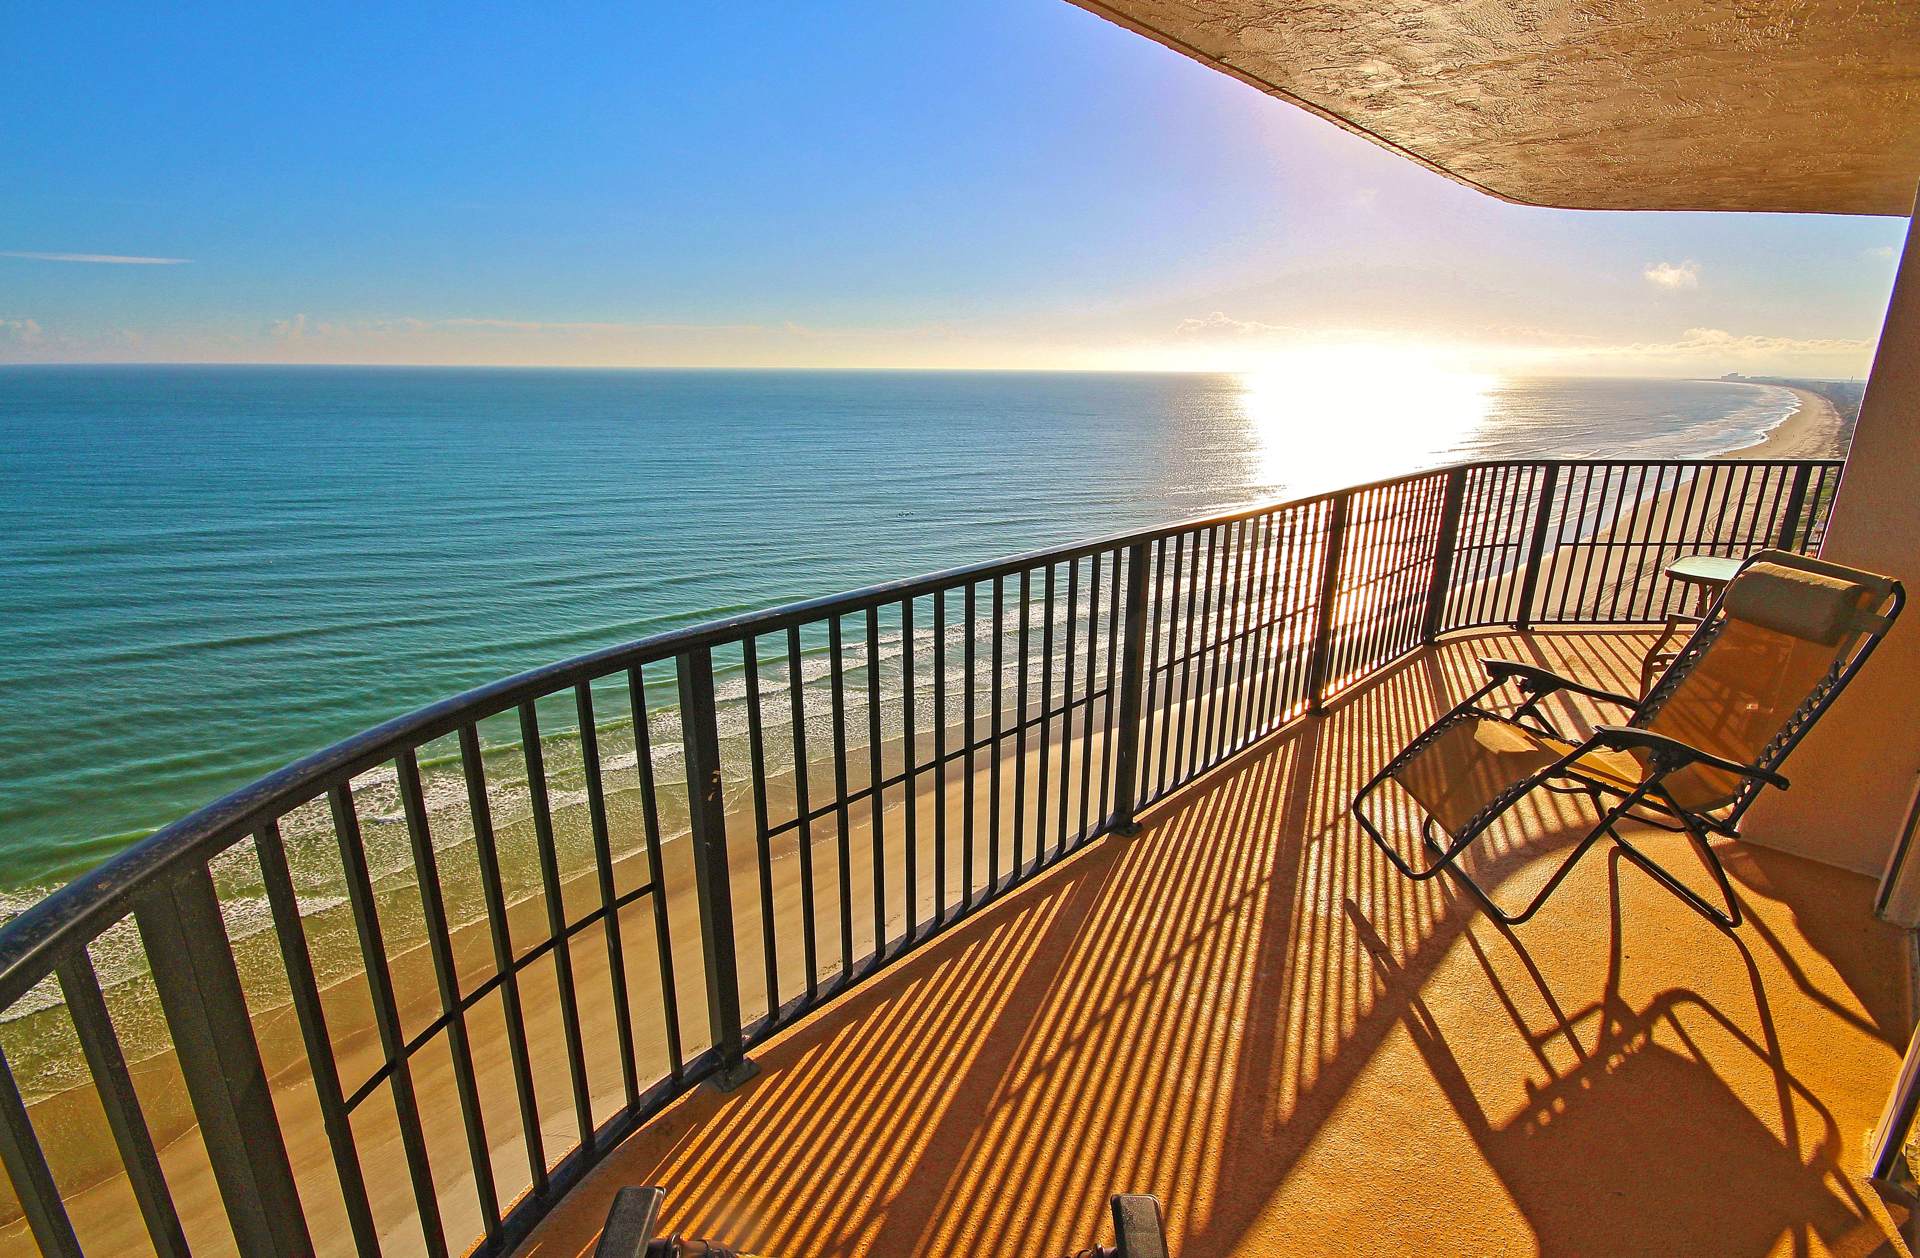 The Balcony with an Incredible Ocean View